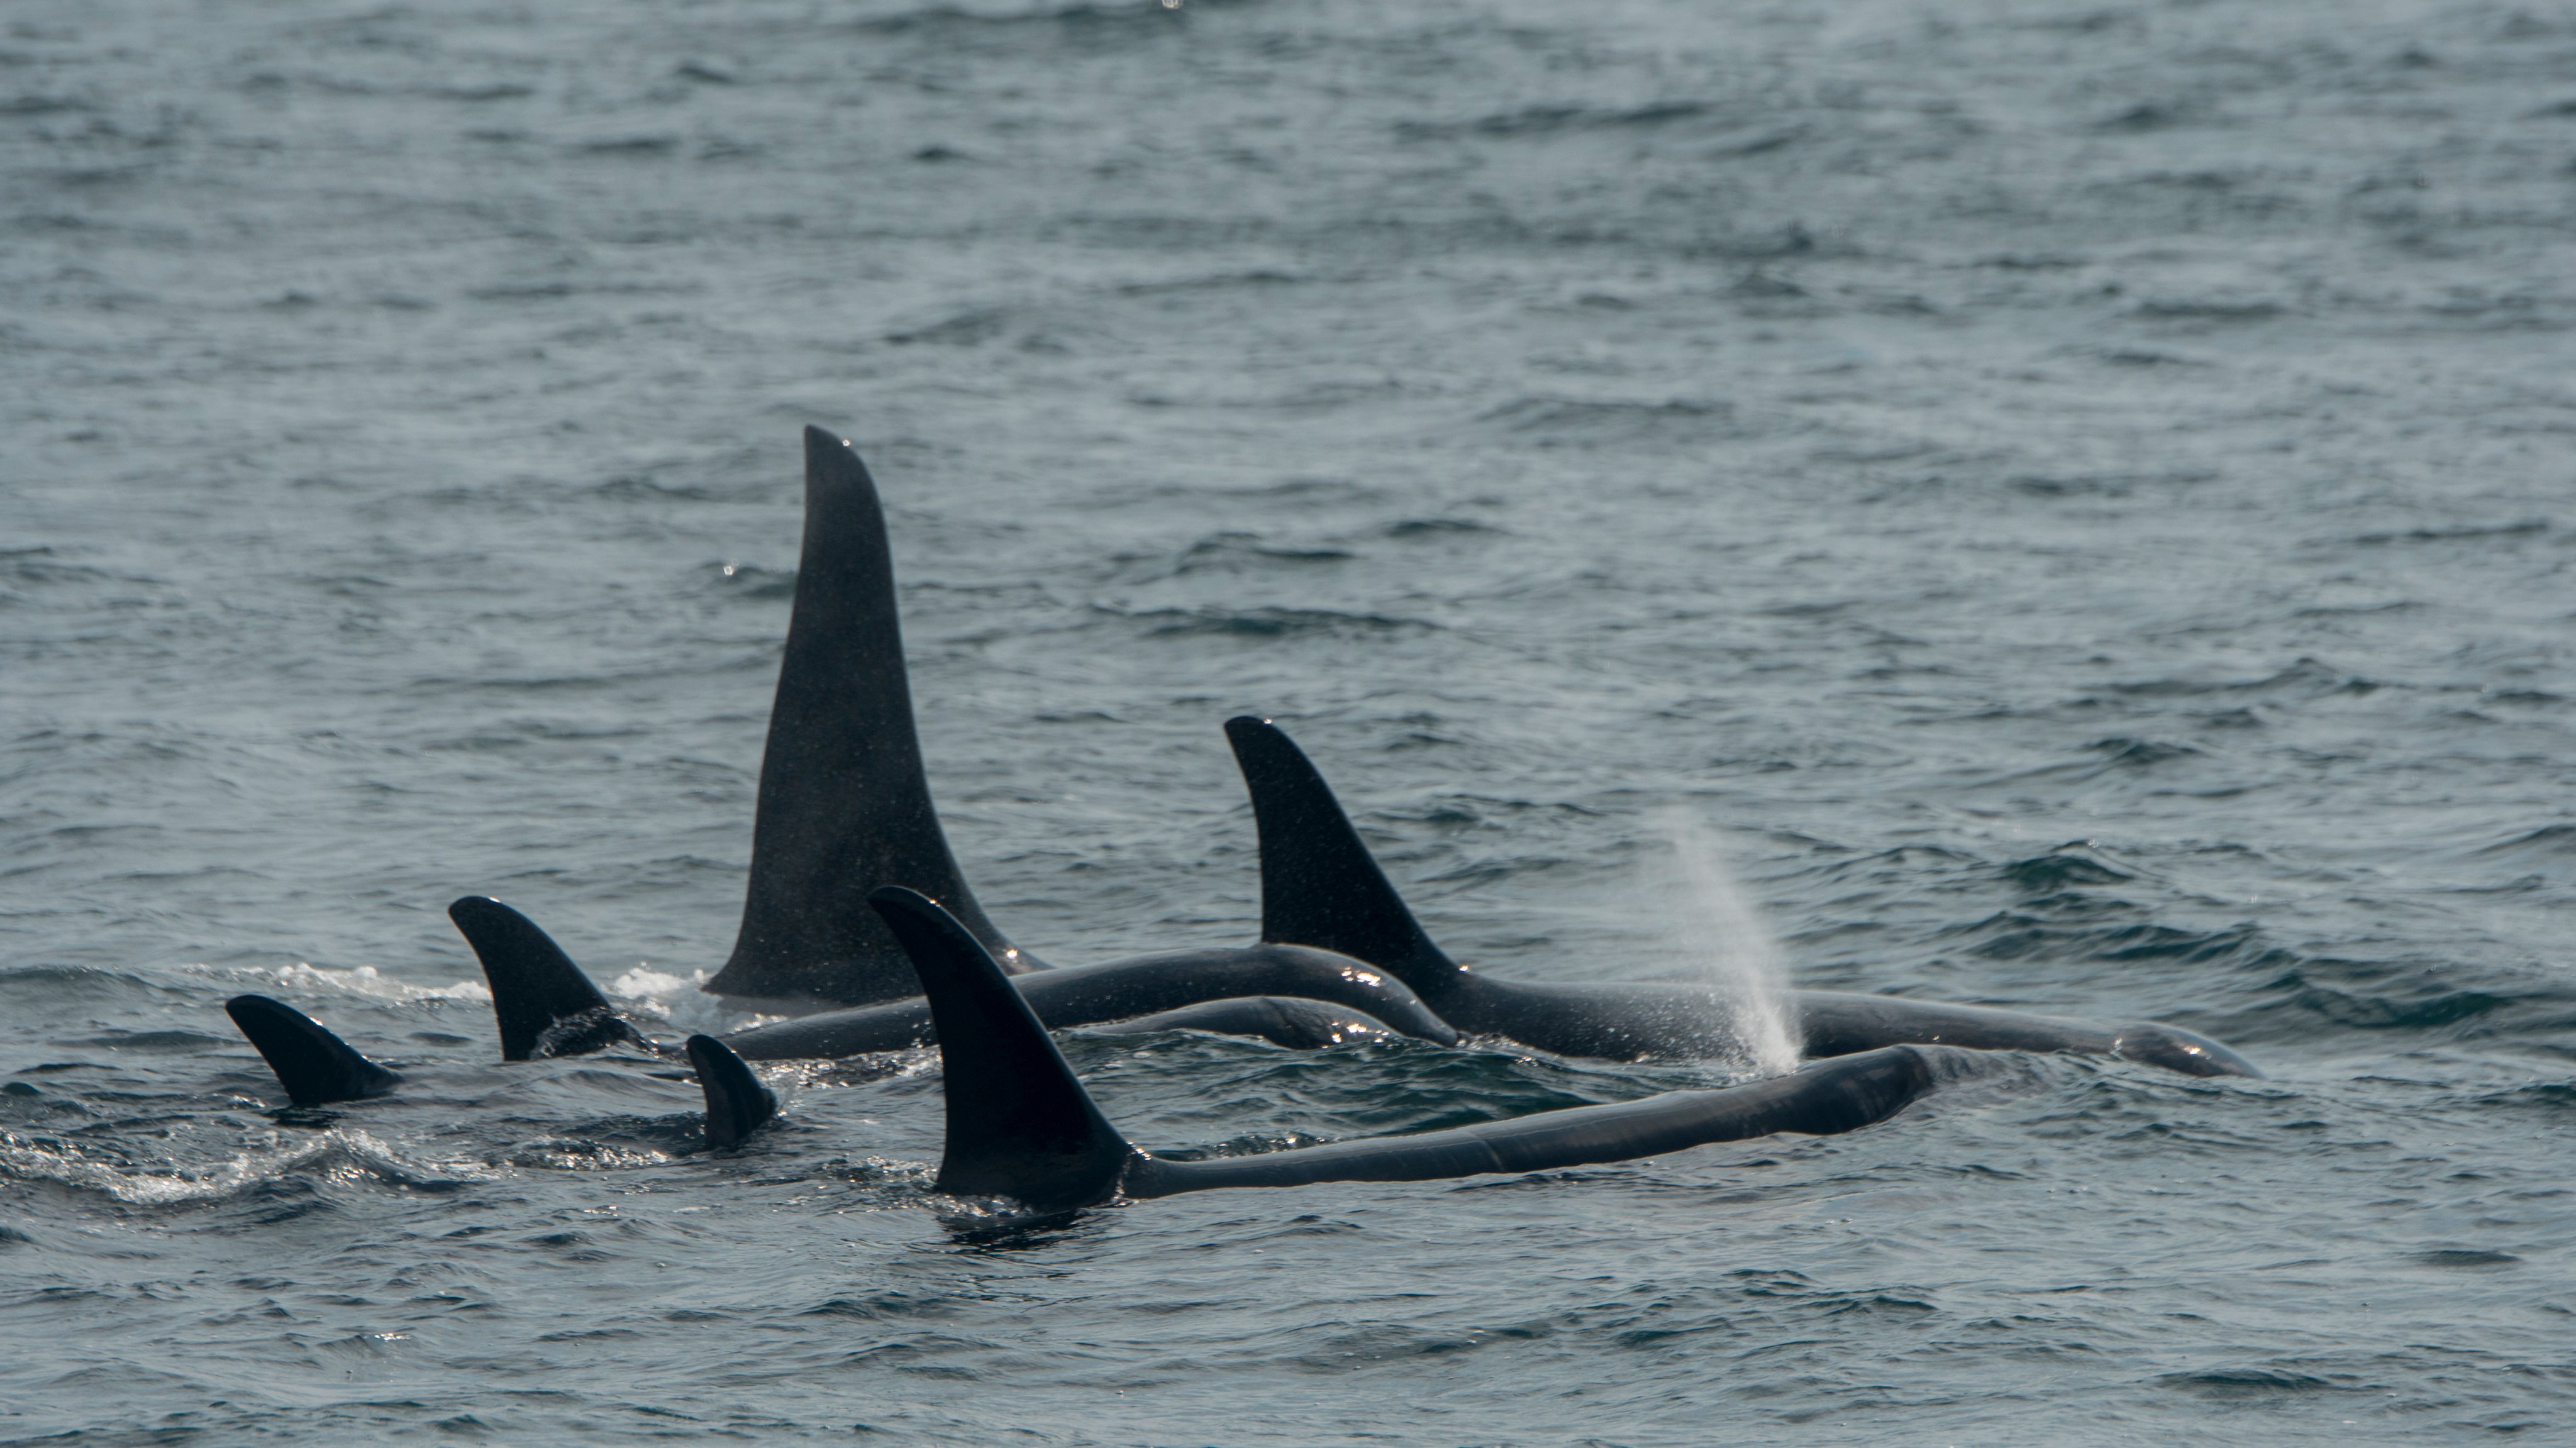 A pod of Killer whales or orcas (Orcinus orca) is swimming